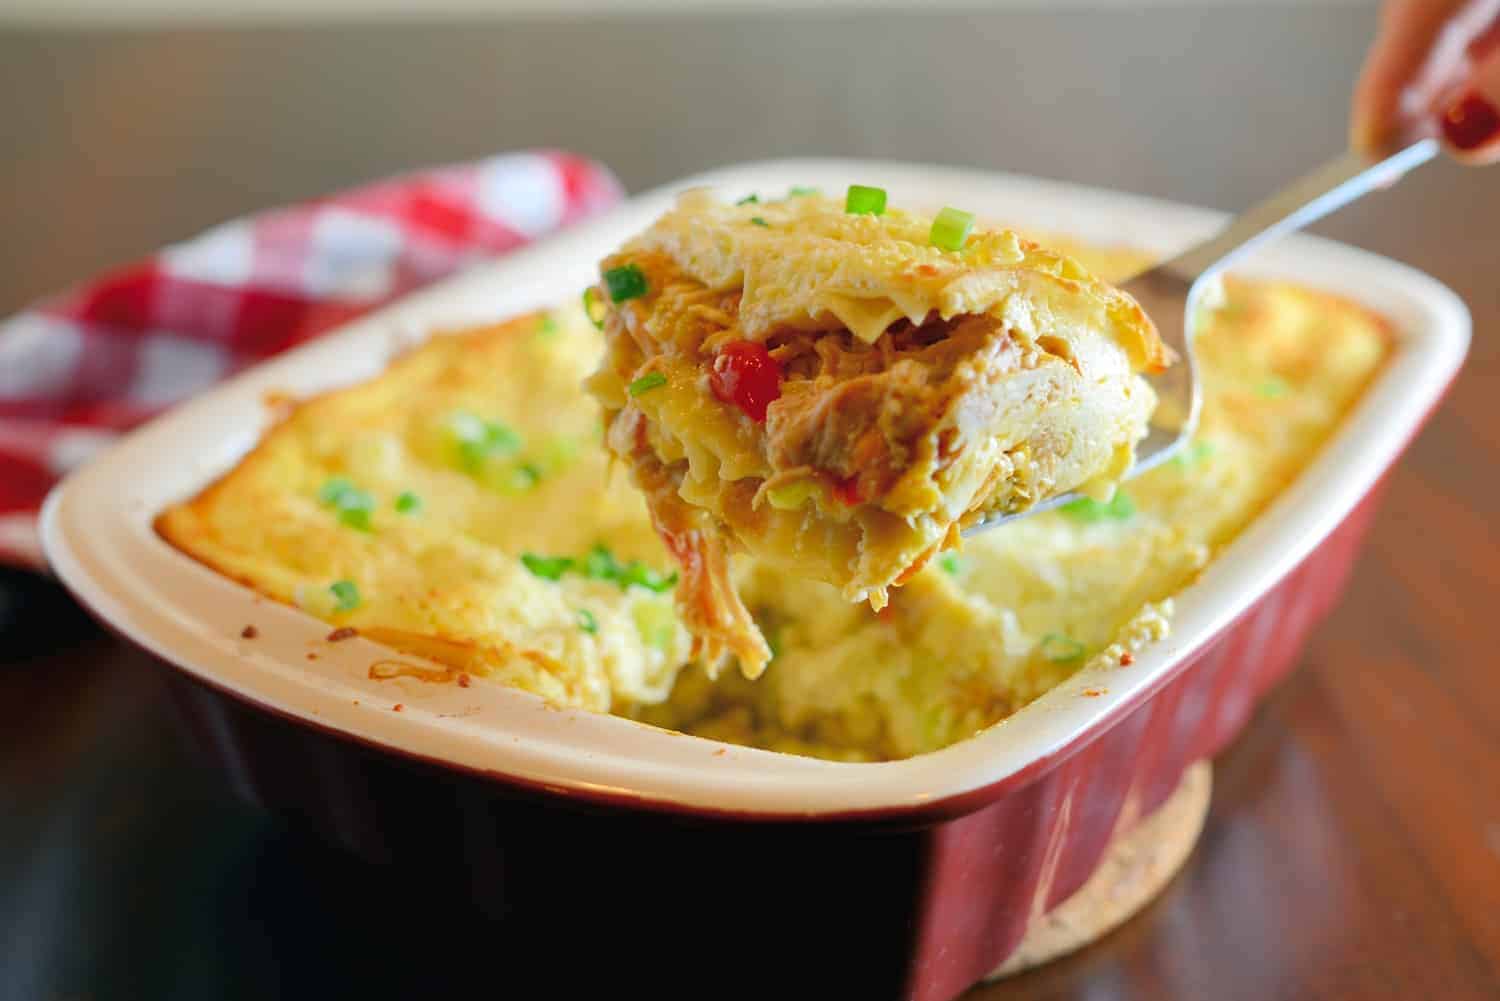 Green Chile Chicken Lasagna is a make-ahead and freezer friendly meal layering no-bake lasagna noodles with shredded chicken, spices, green chiles and lots of cheese! #chickenlasagna #mexicanlasagna www.savoryexperiments.com 